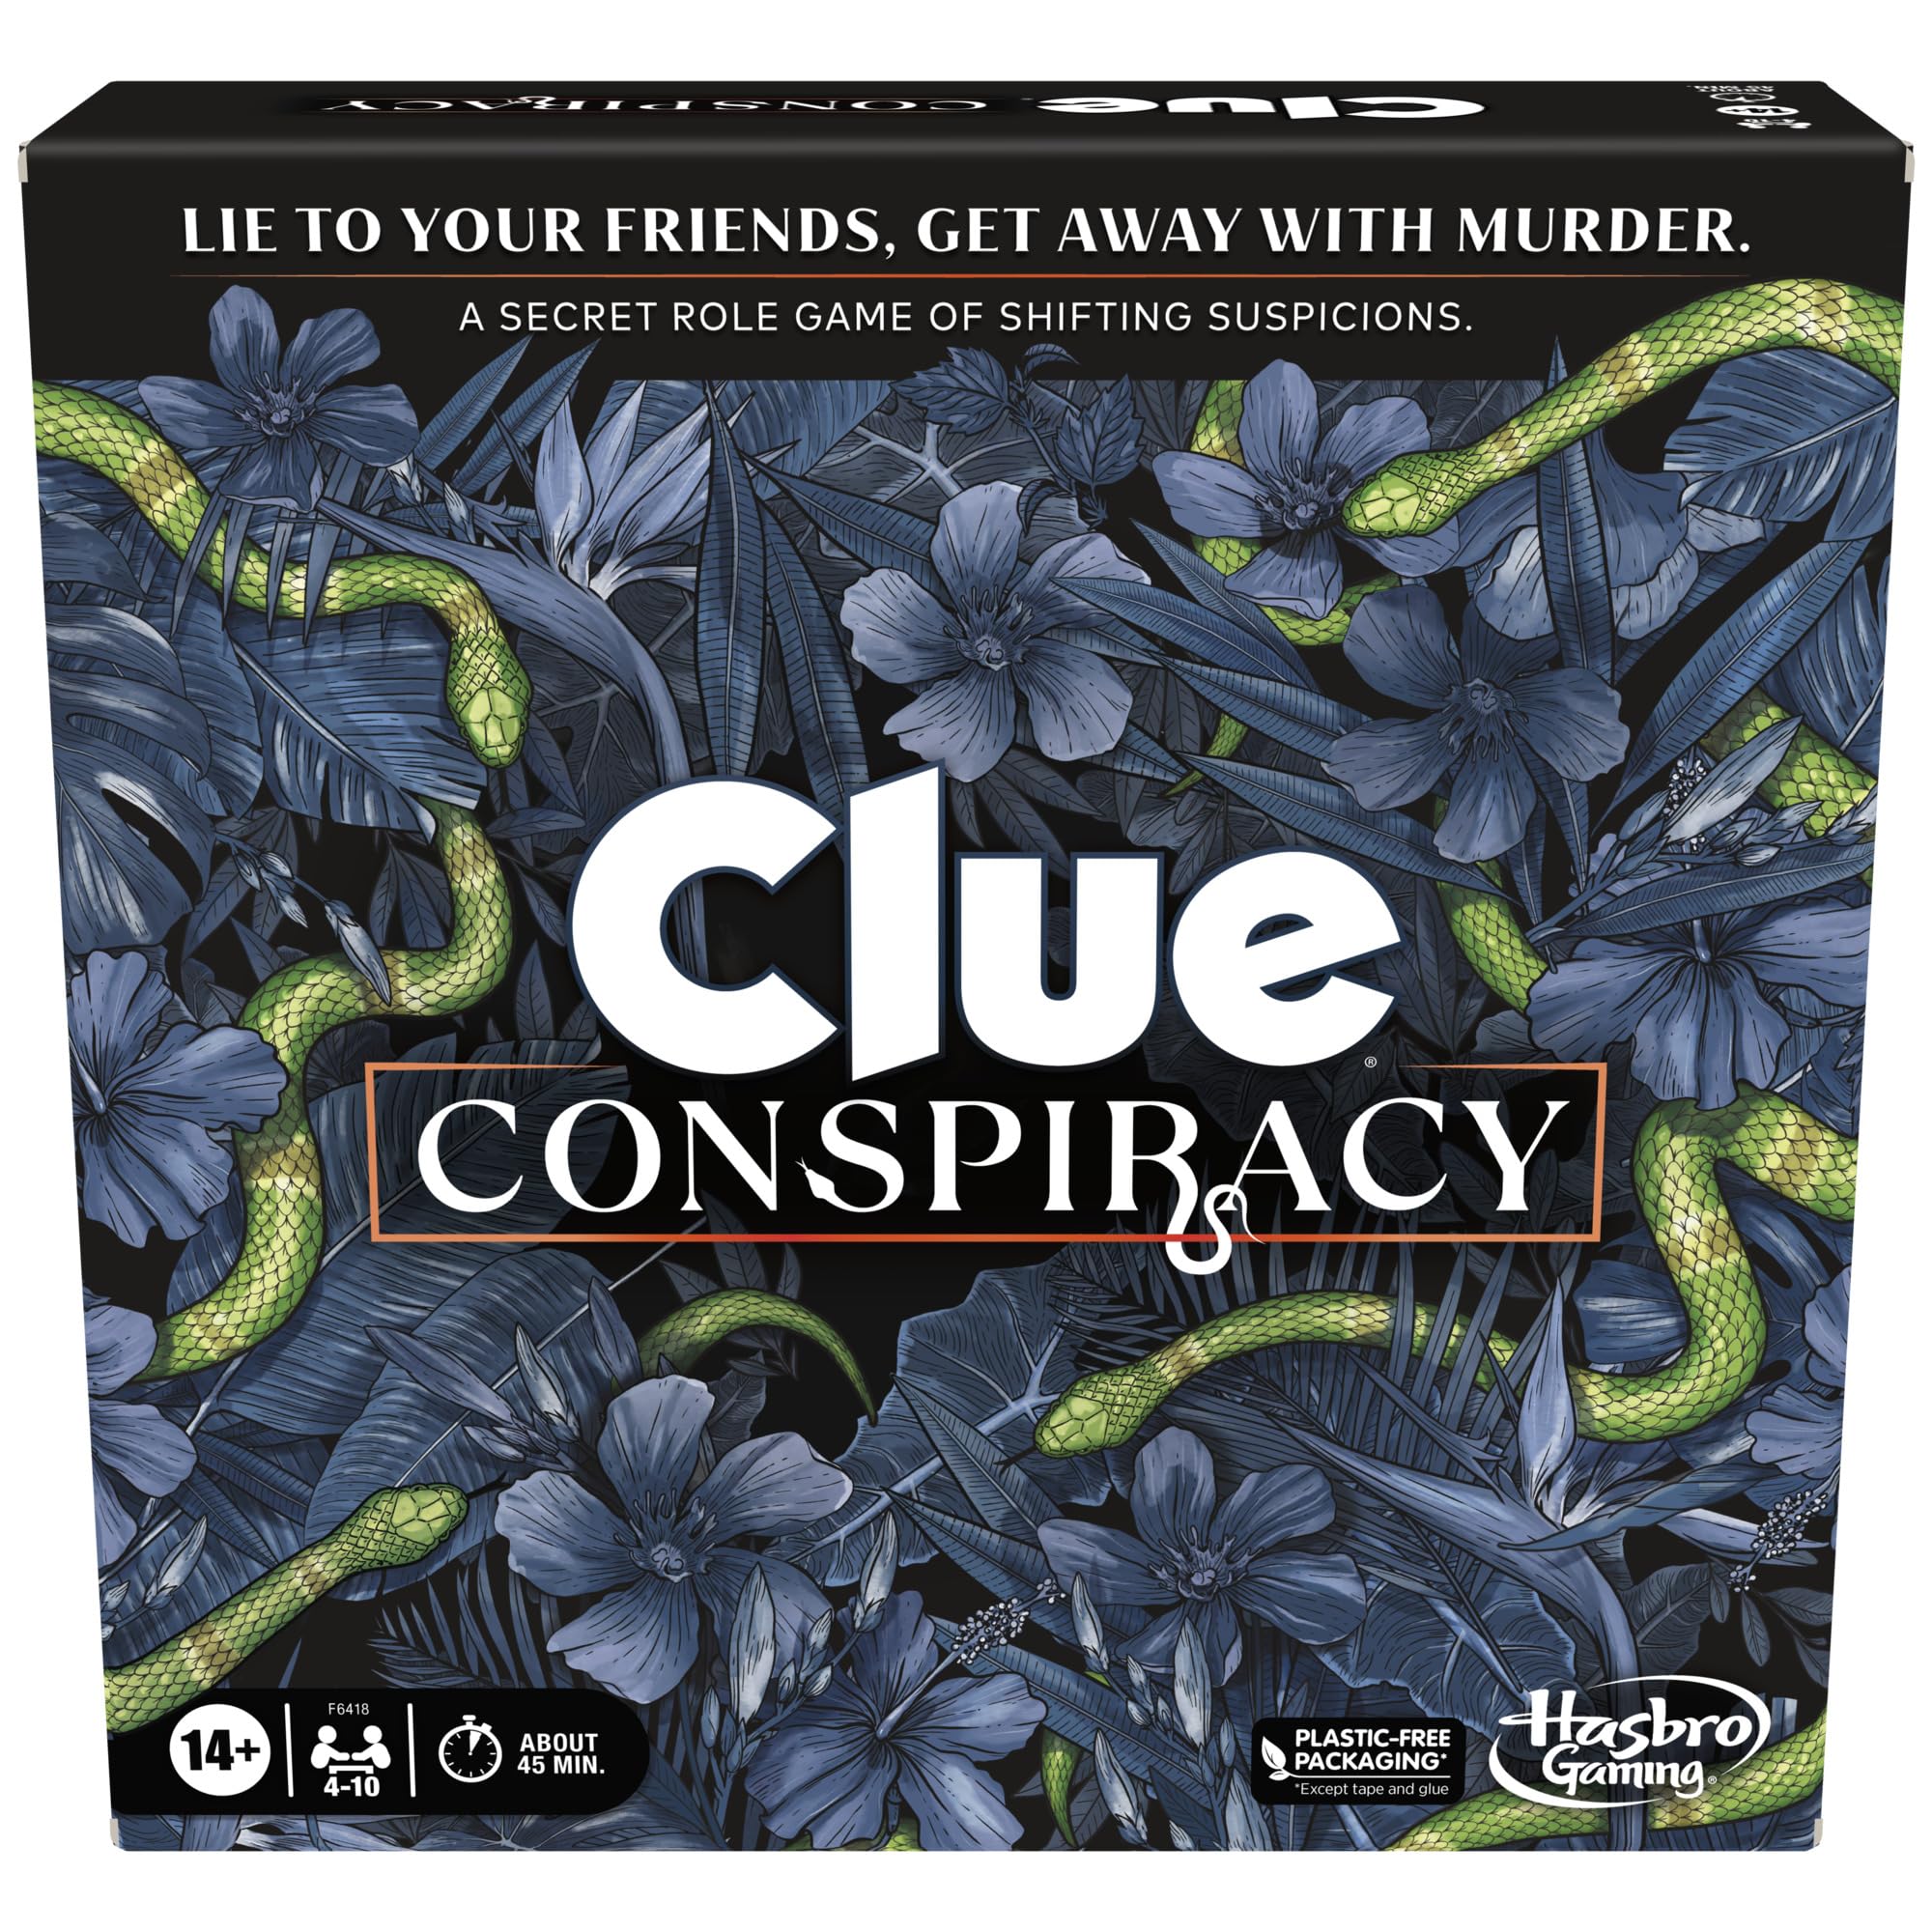 Clue Conspiracy Board Game for Adults and Teens | Secret Role Strategy Games | Ages 14+ | 4-10 Players | 45 Mins.| Mystery & Party Games